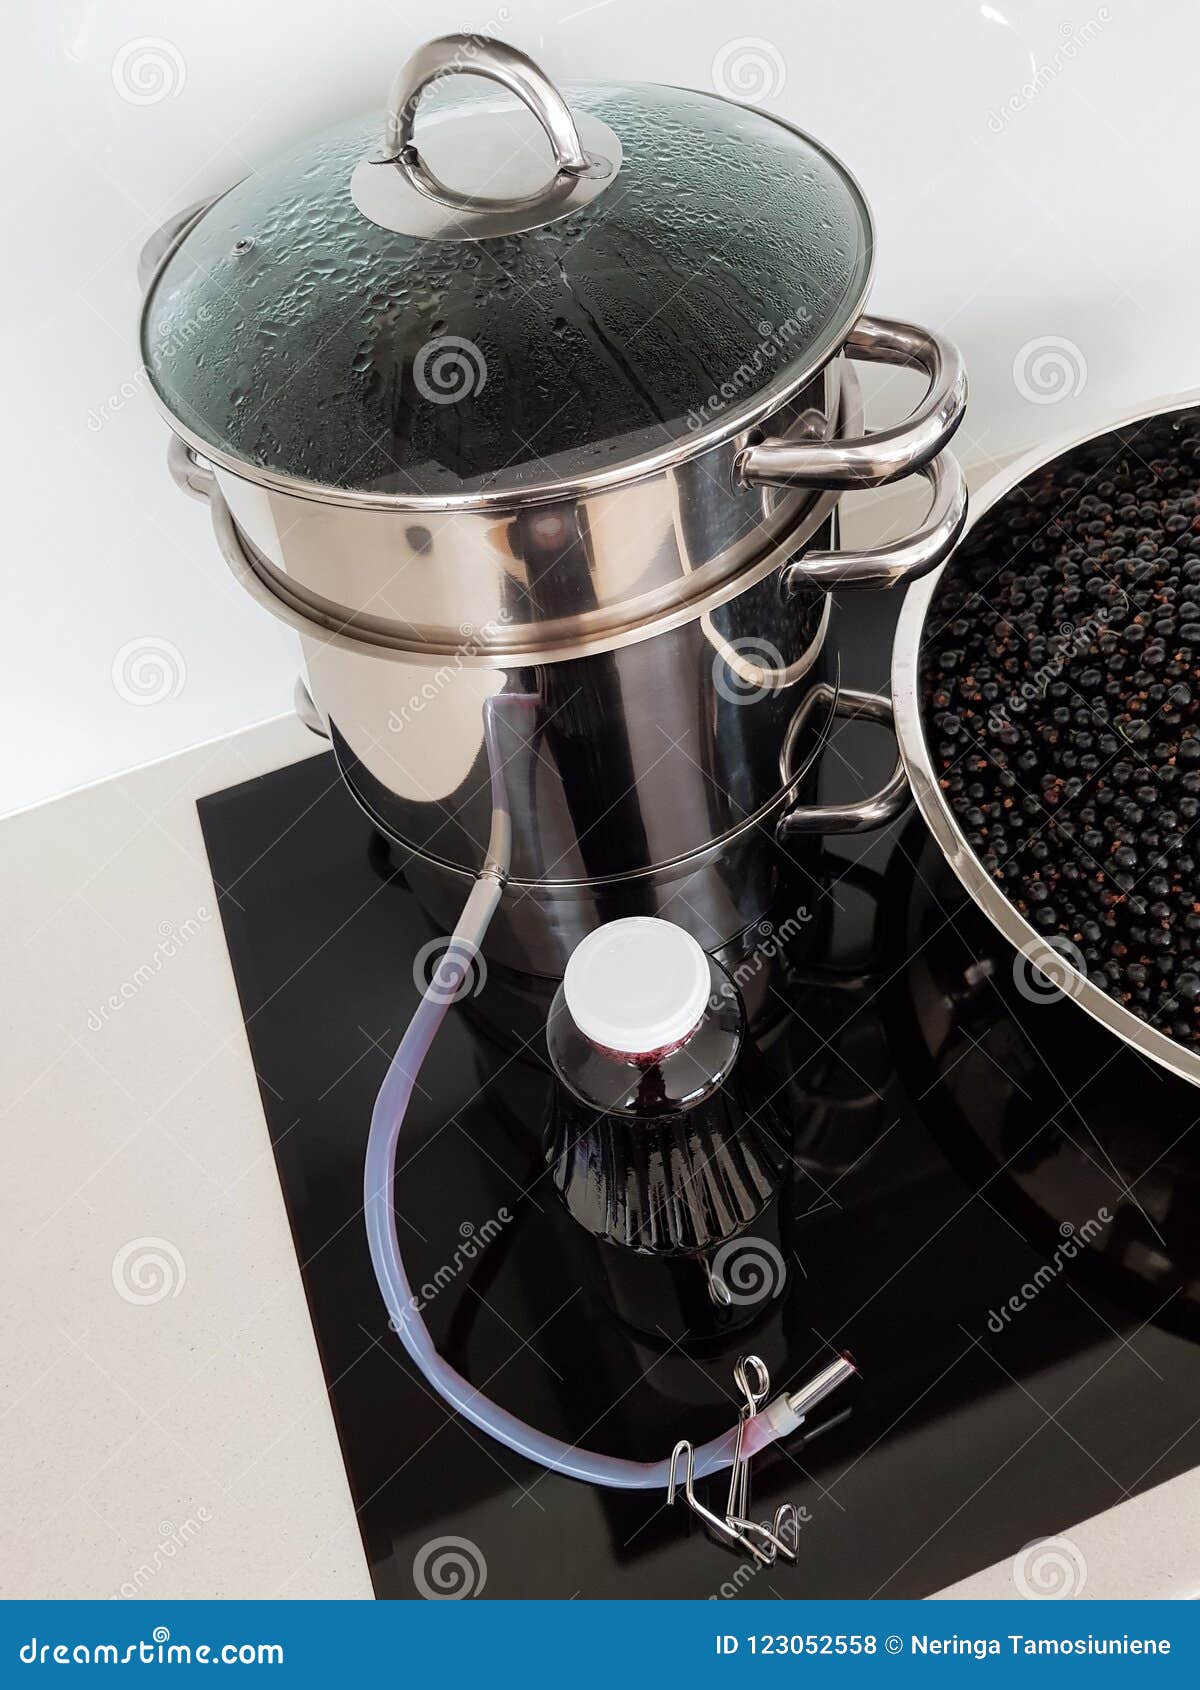 Black Currant Juice Making by Steam Juicer Pot in the Kitchen Stock Photo -  Image of plant, country: 123052558